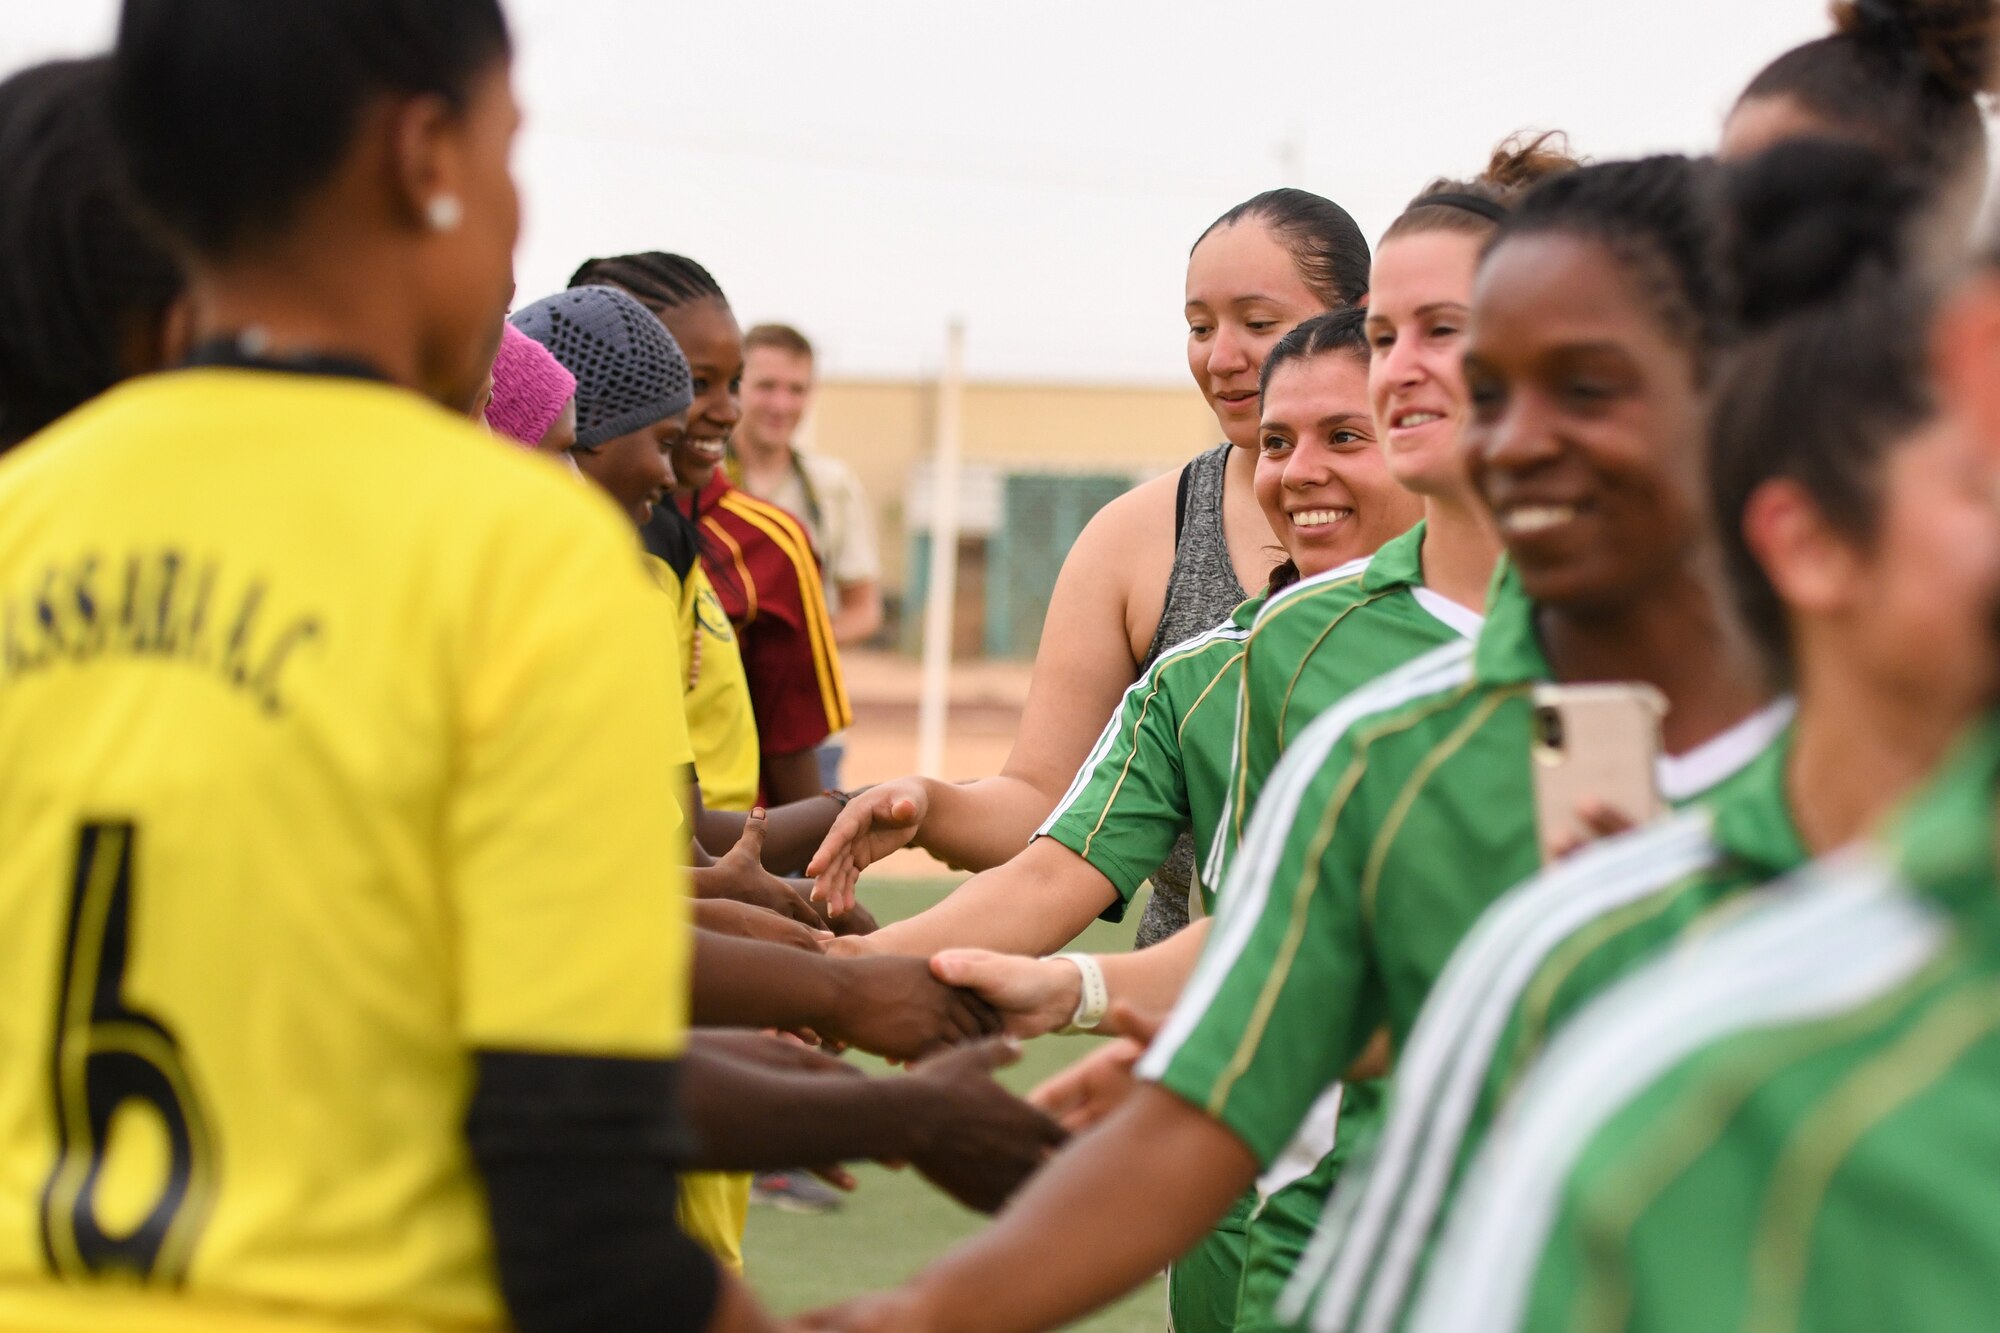 U.S. Air Force women deployed to Nigerien Air Base 201 and the Nassara Athletic Club Women’s Soccer Team shake hands after a community outreach game at the Agadez Sports Stadium in Agadez, Niger, July 5, 2019. The civil affairs team held the game to build rapport and promote positive sentiment between the local community and AB 201 personnel. (U.S. Air Force photo by Senior Airman Lexie West)